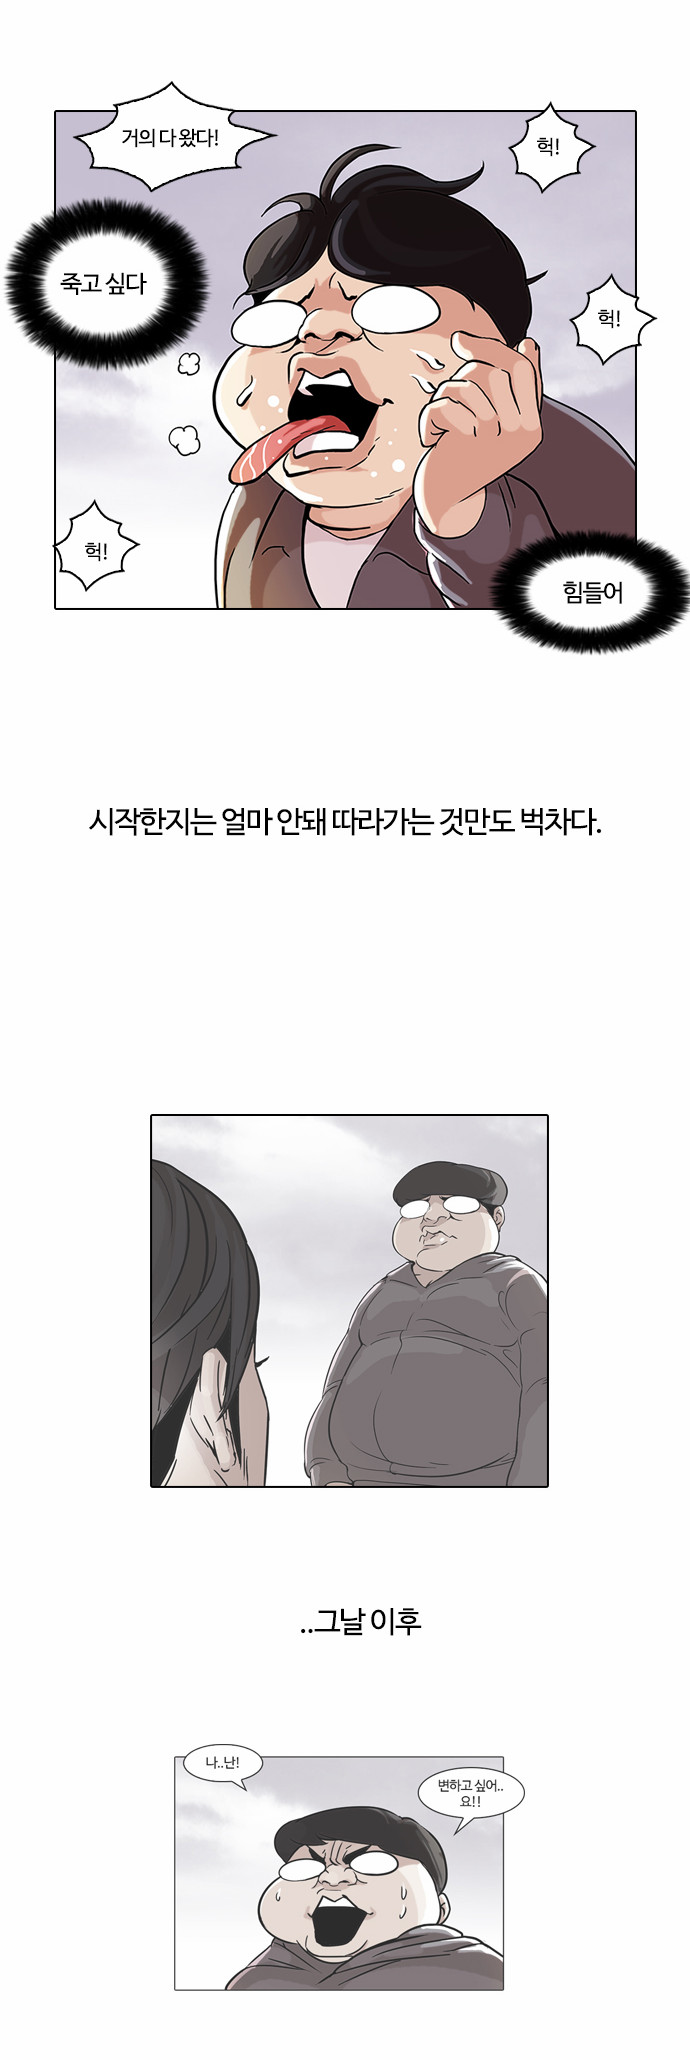 Lookism - Chapter 51 - Page 2